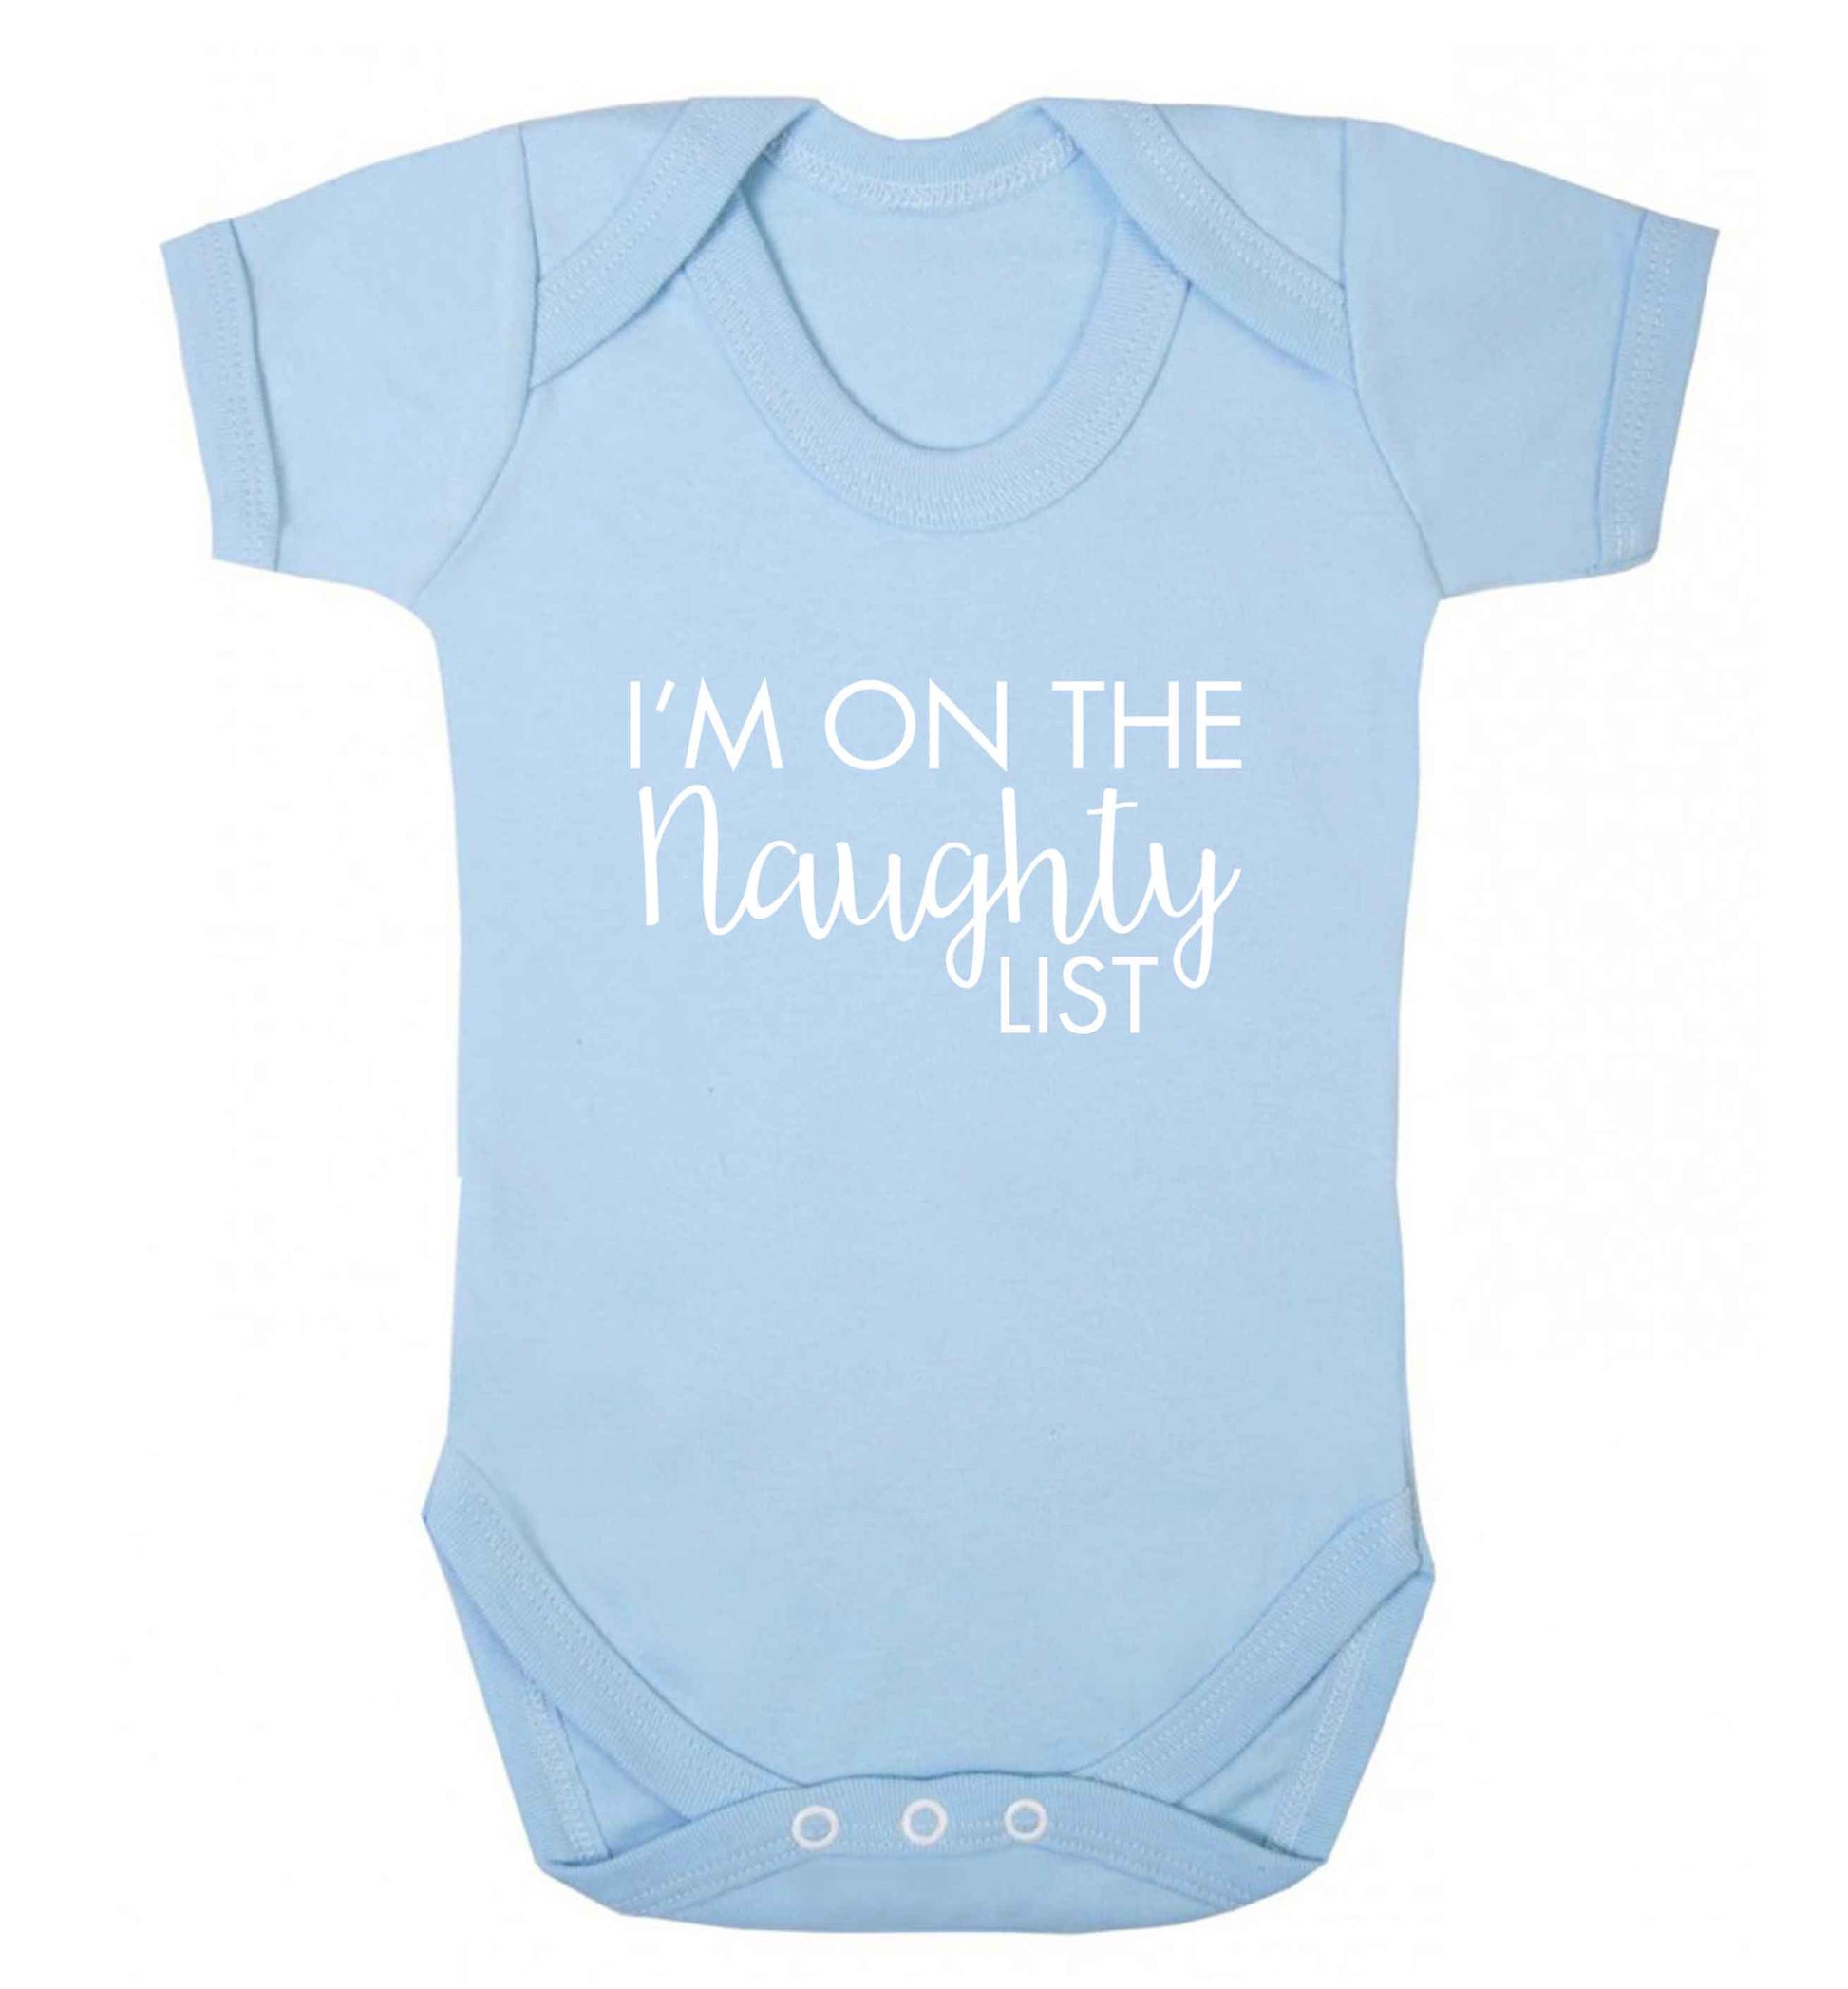 I'm on the naughty list baby vest pale blue 18-24 months